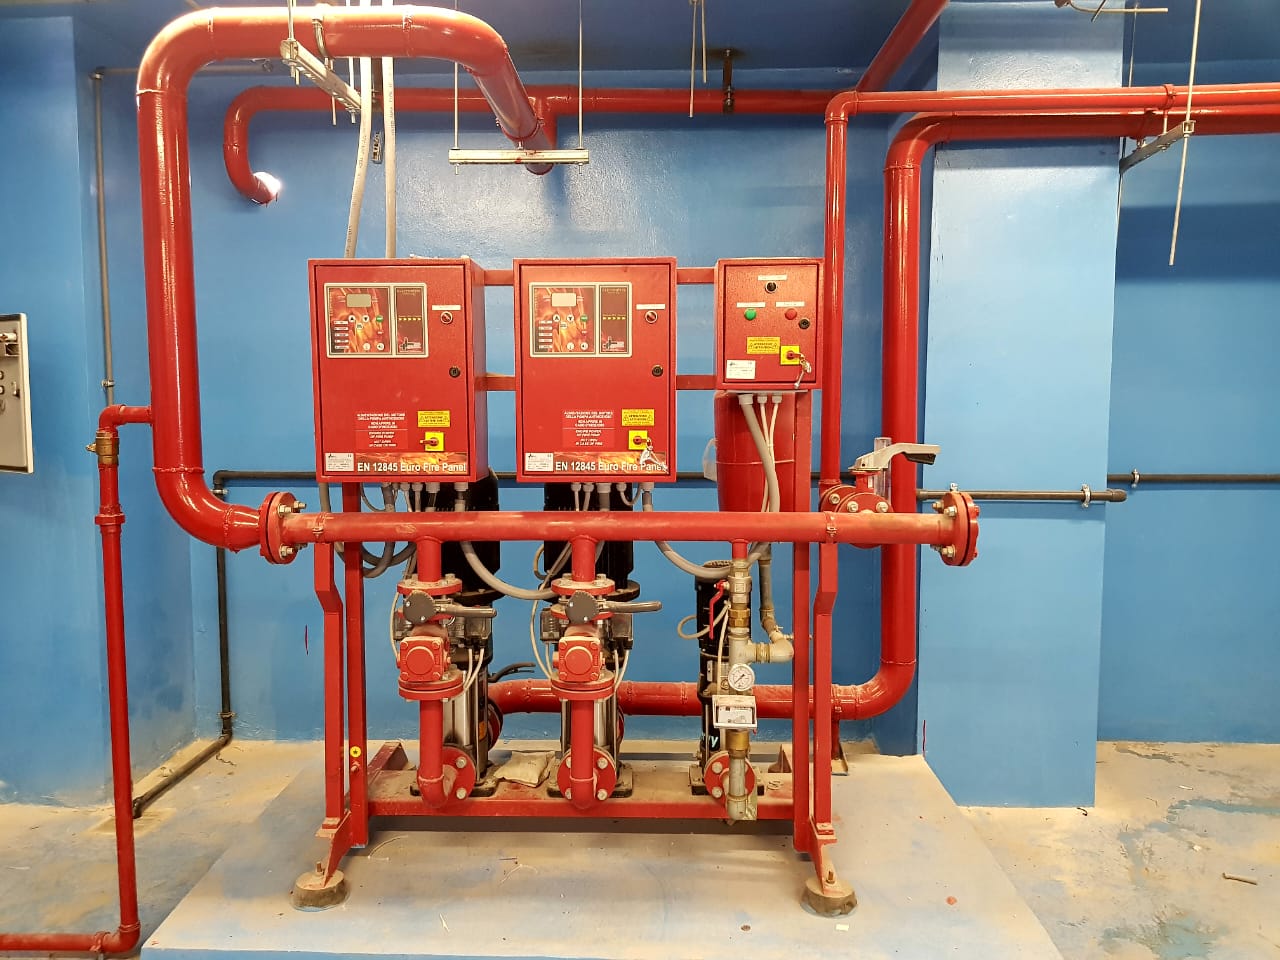 Supply and Installation of EN12845 Fire Fighting Unit for Nerve Disease Hospital